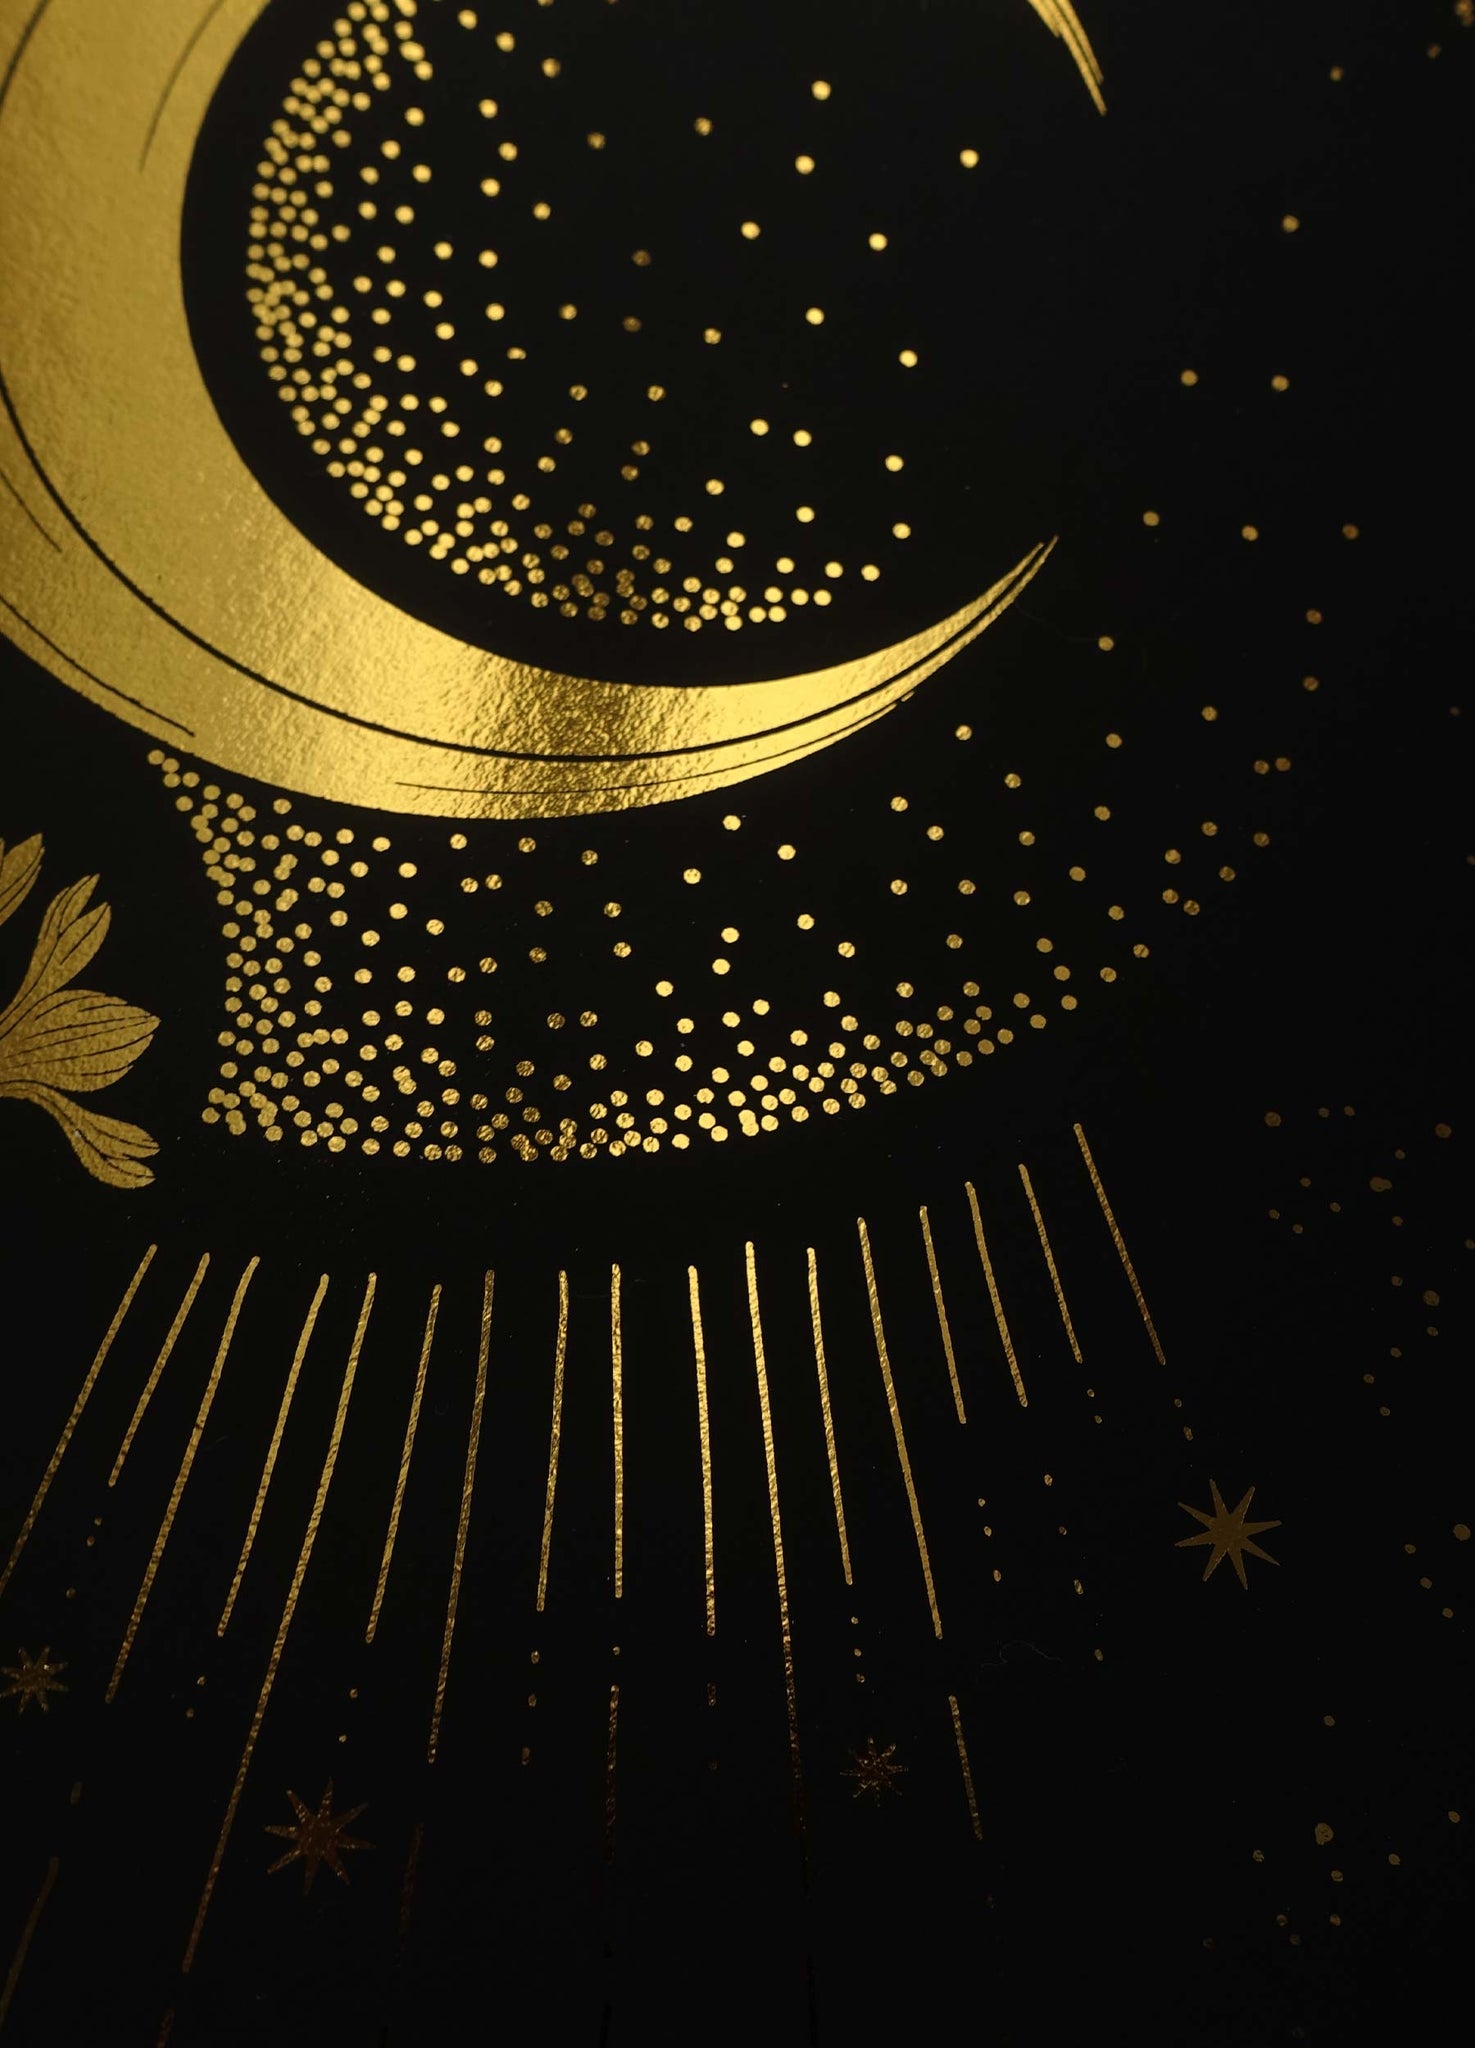 Moonlight Aroma, with flowers - the Lady of the Night Moon gold foil art print on black paper by Cocorrina & Co